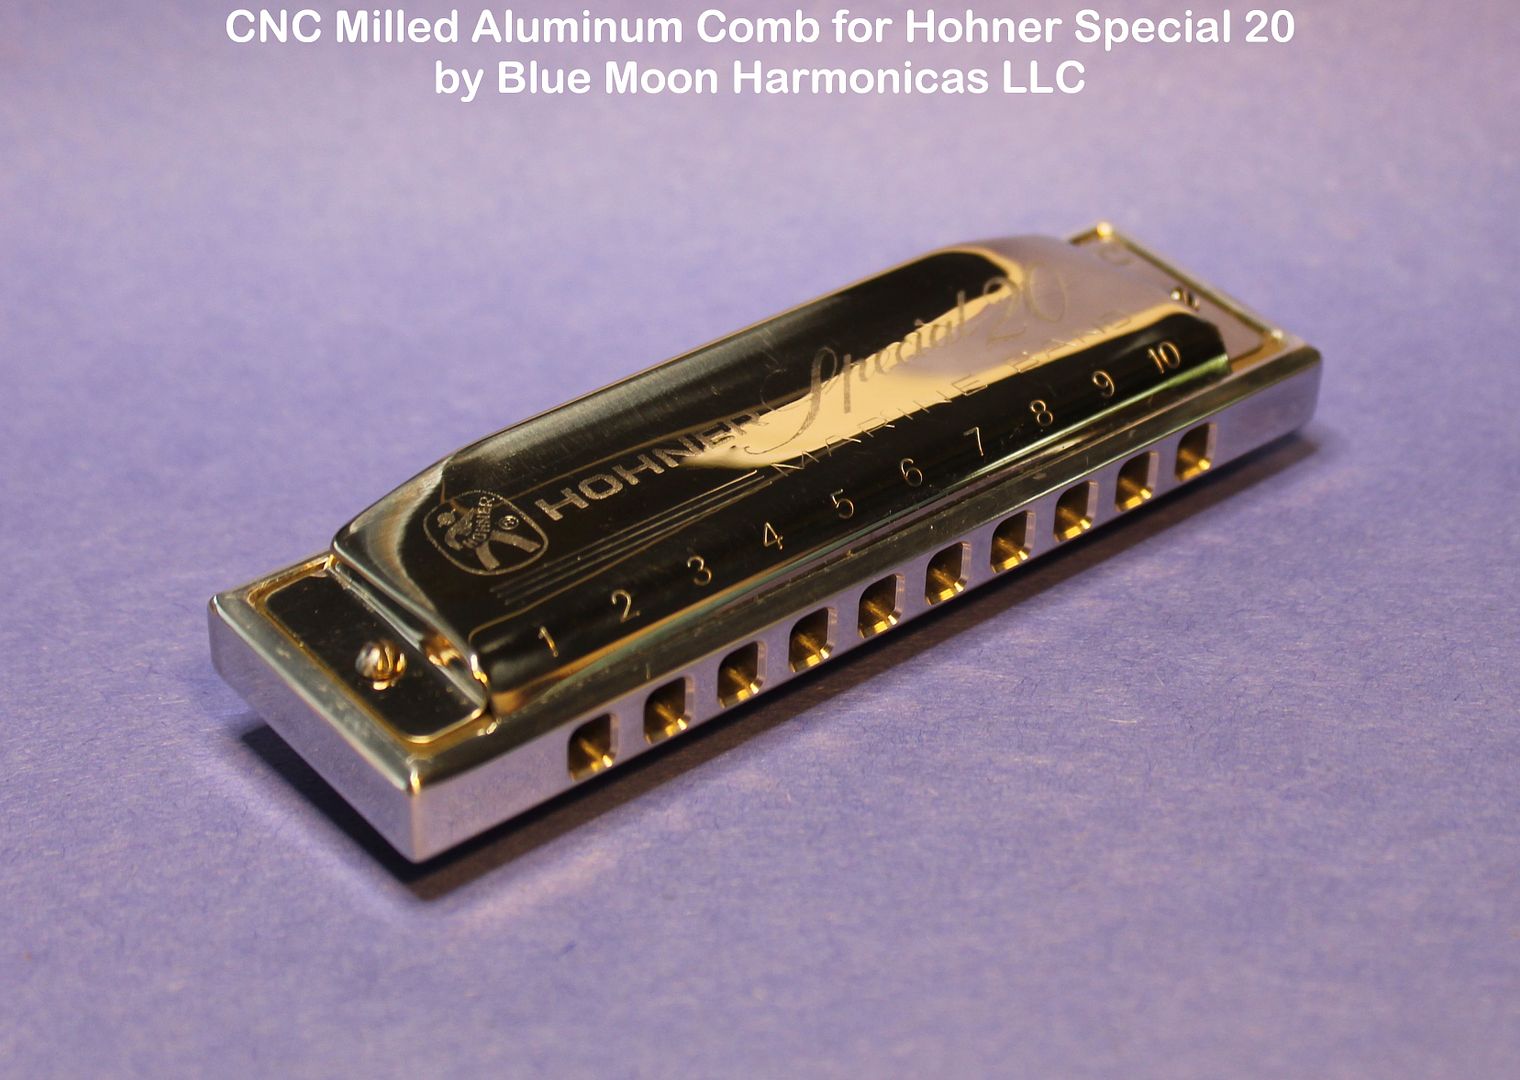 Hohner Special 20 with Milled Aluminum Comb photo a_zps39c6e403.jpg